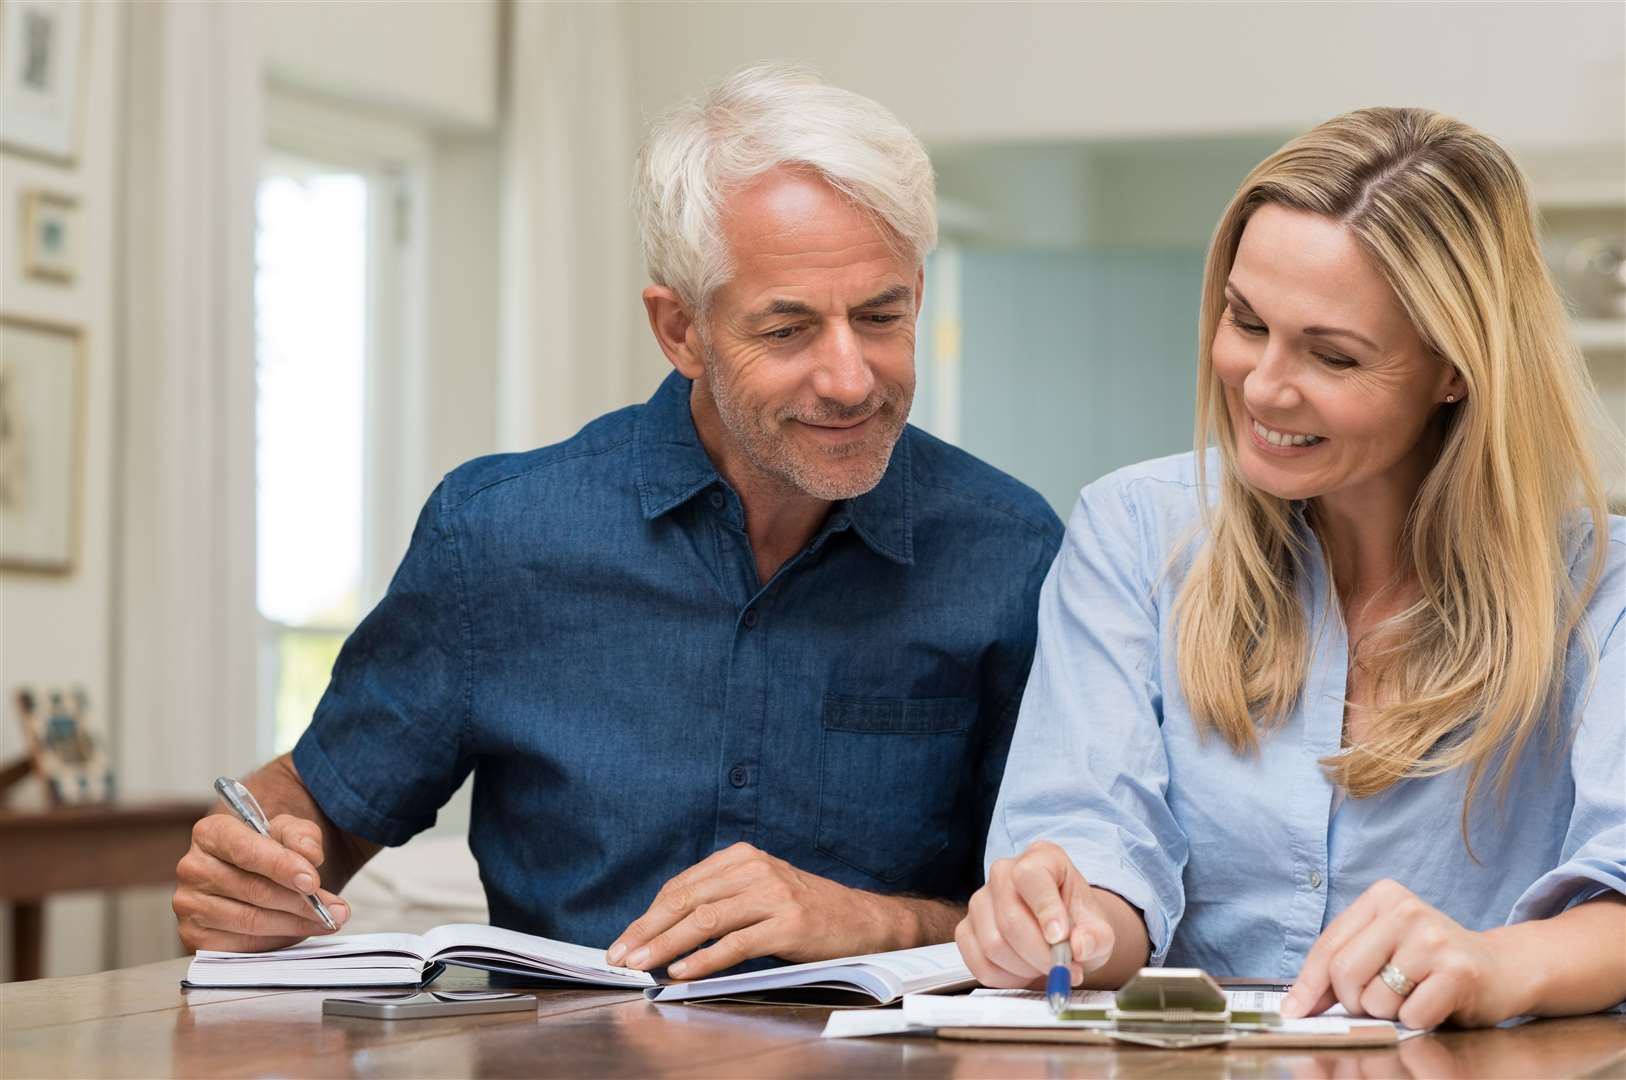 More than £1.7 billion was unclaimed in pension credits between 2019 and 2020. Image: iStock.